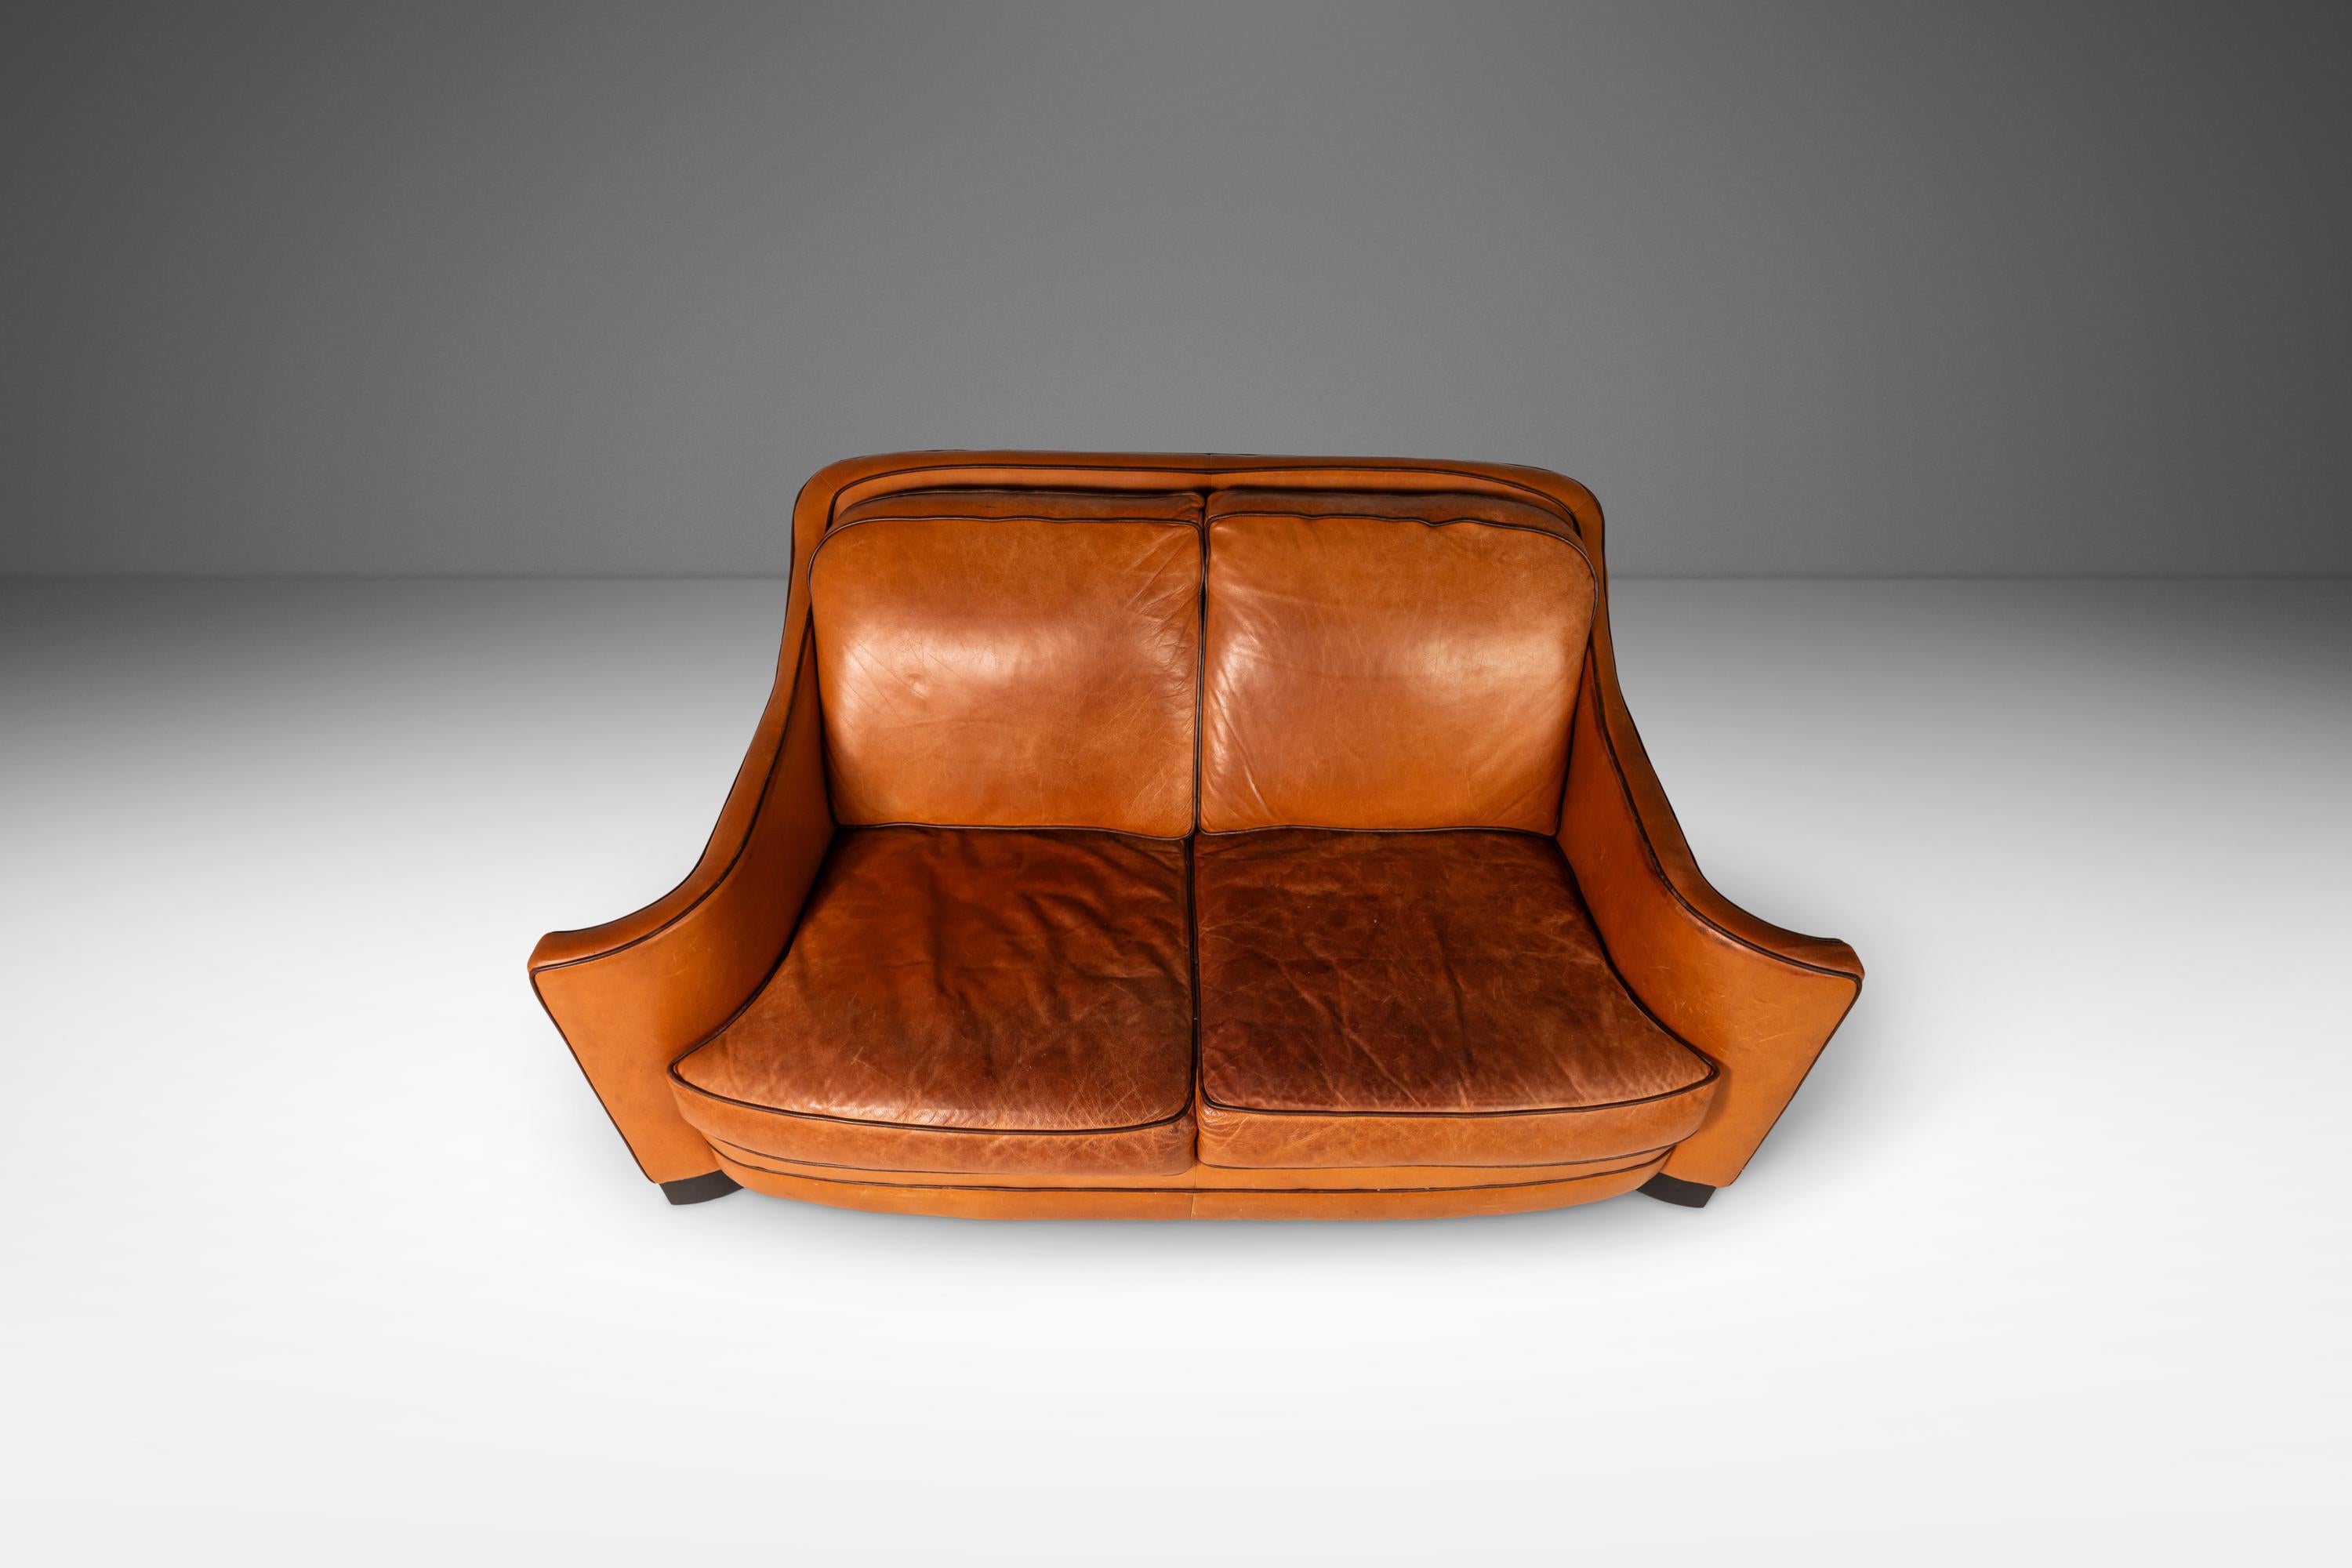 Art Deco Loveseat Sofa with Sculptural Arms in Patinaed Leather, USA, c. 1970s For Sale 11